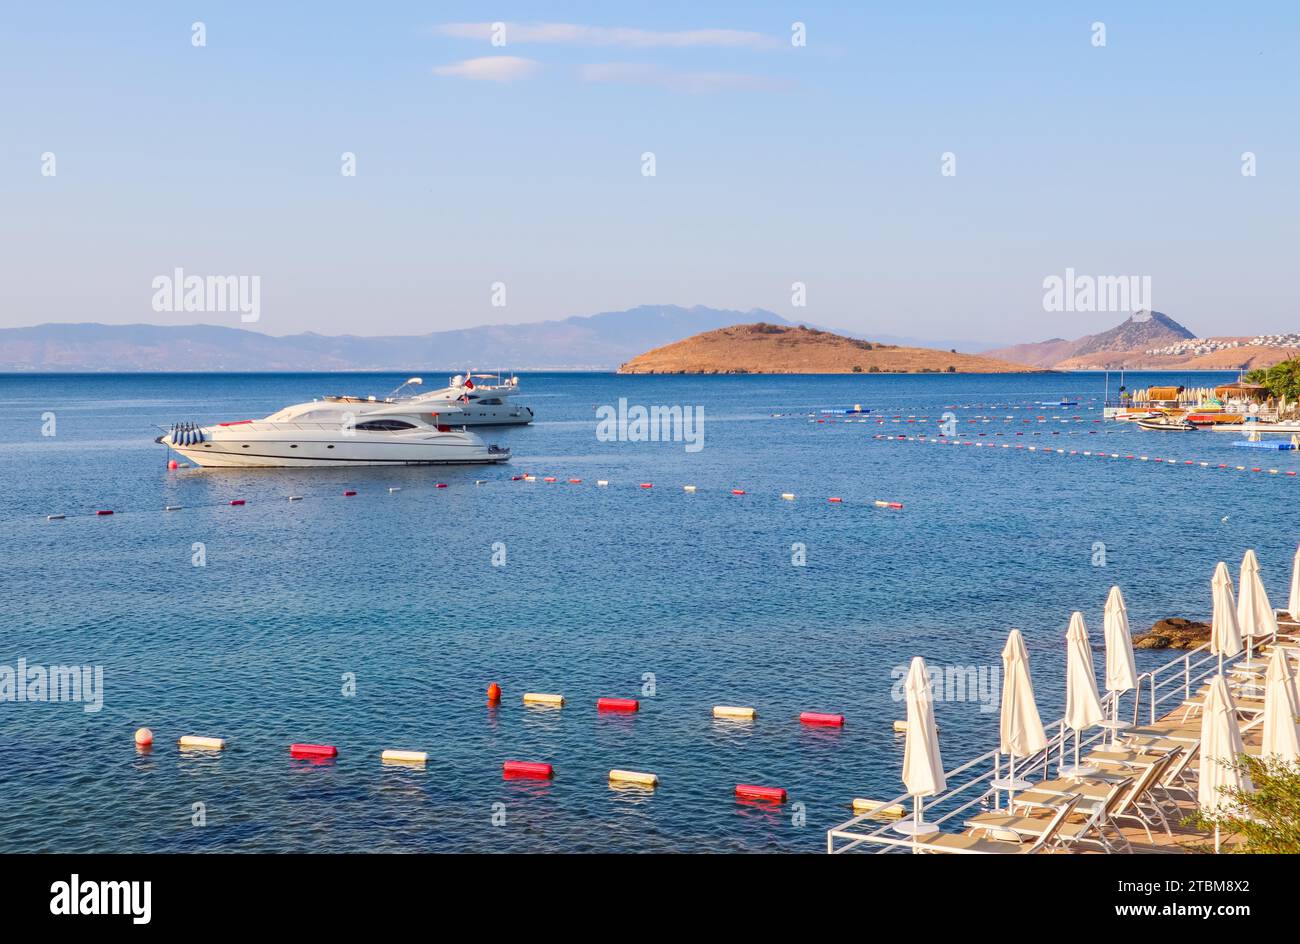 Beautiful Mediterranean coast with islands, mountains and yachts in the blue sea Stock Photo